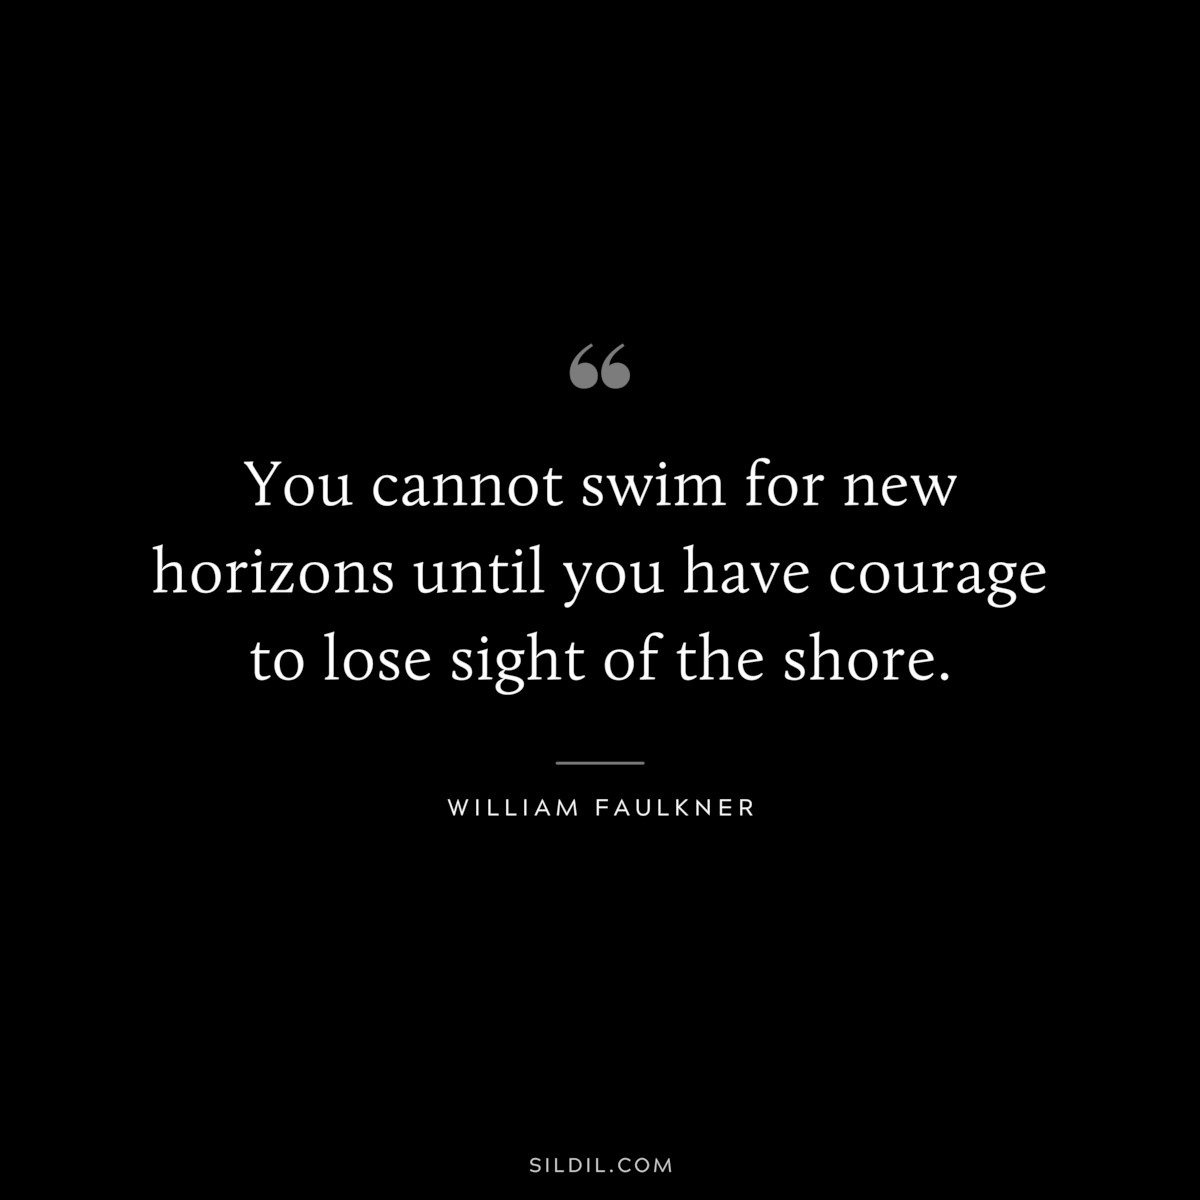 You cannot swim for new horizons until you have courage to lose sight of the shore. ― William Faulkner